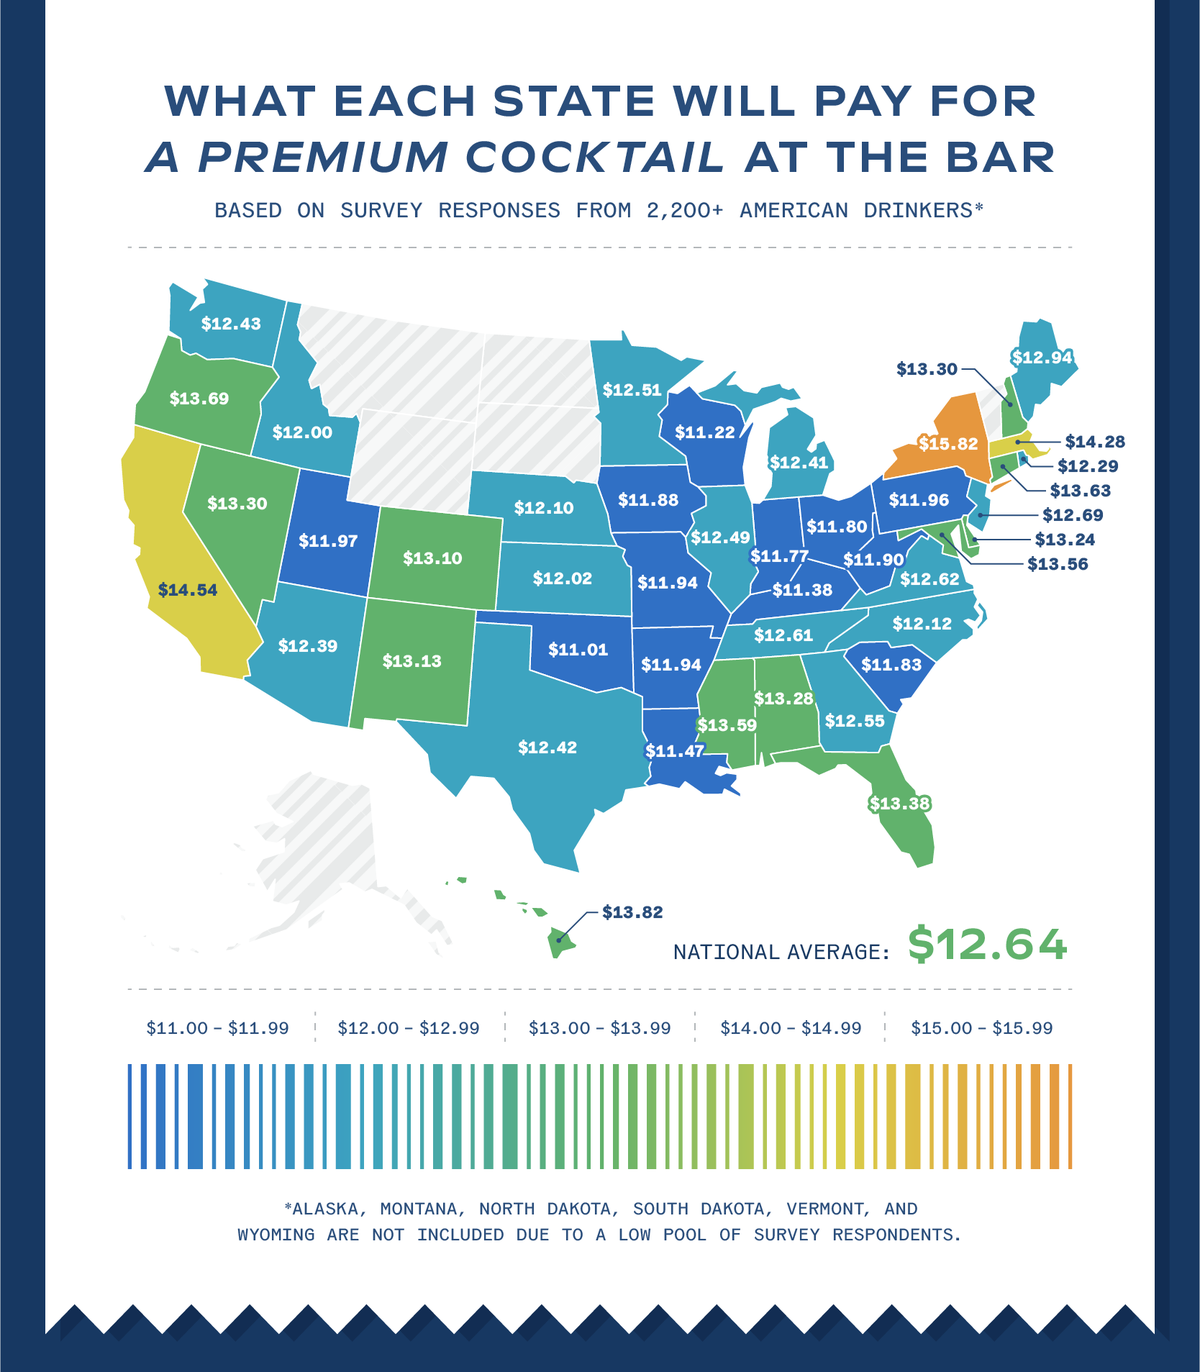 U.S. heatmap showcasing how much each state is willing to pay for a cocktail